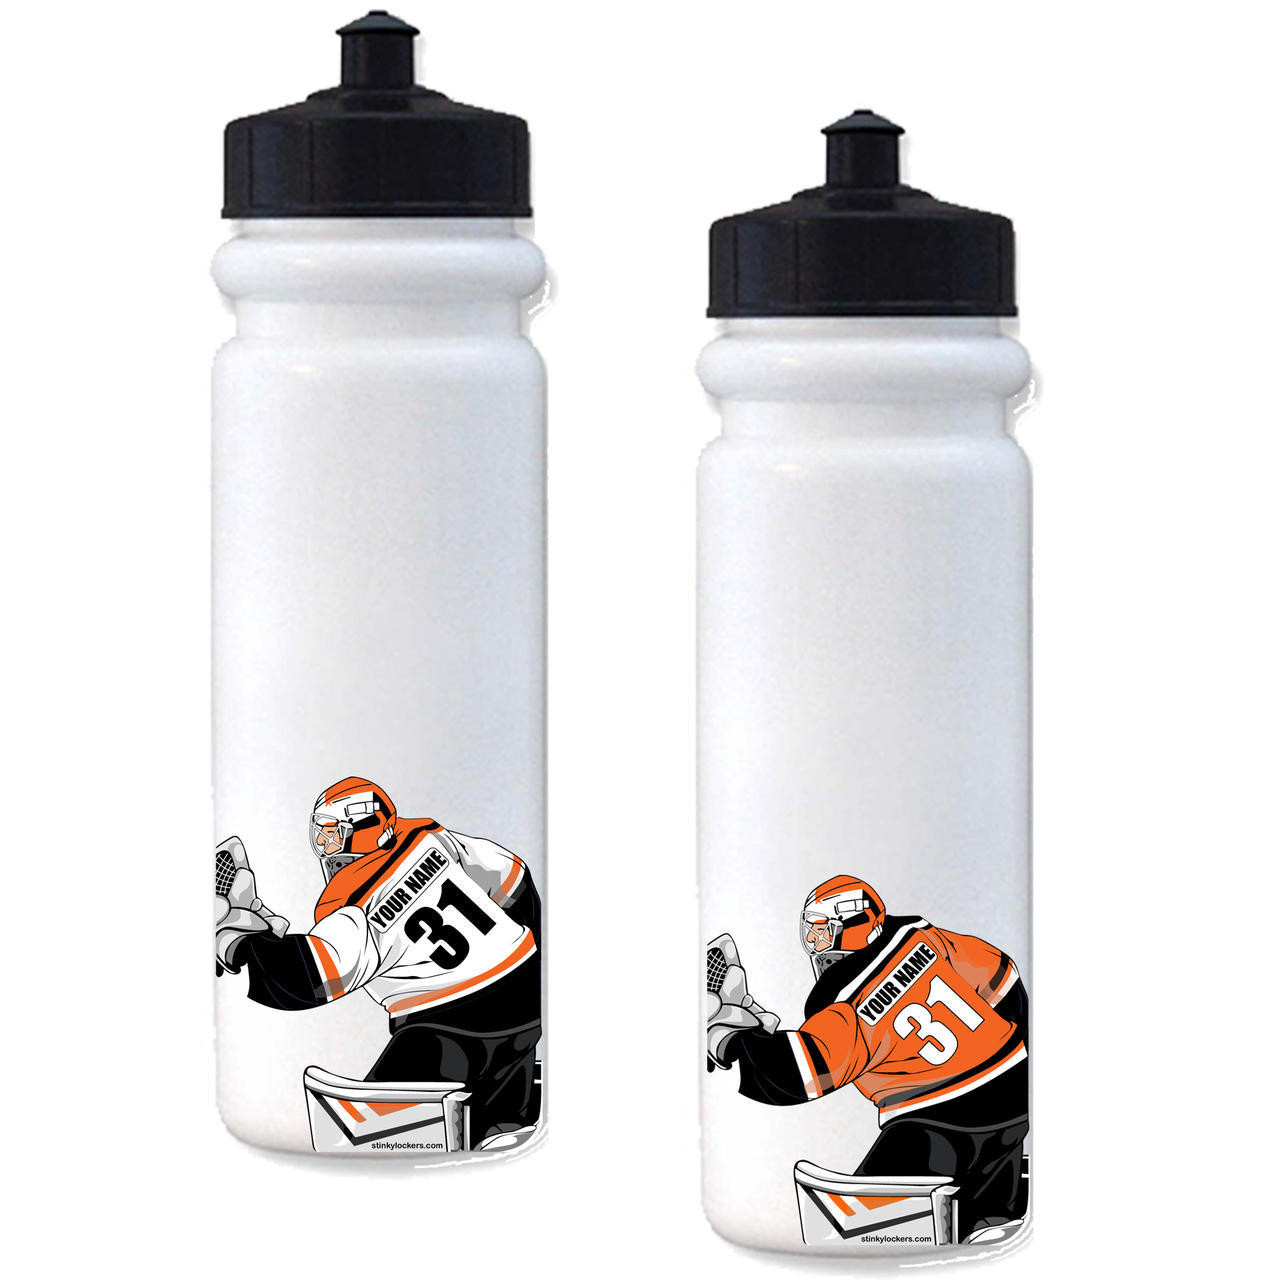 Stinky Lockers Personalized Goalie Stickers-6 Pack 